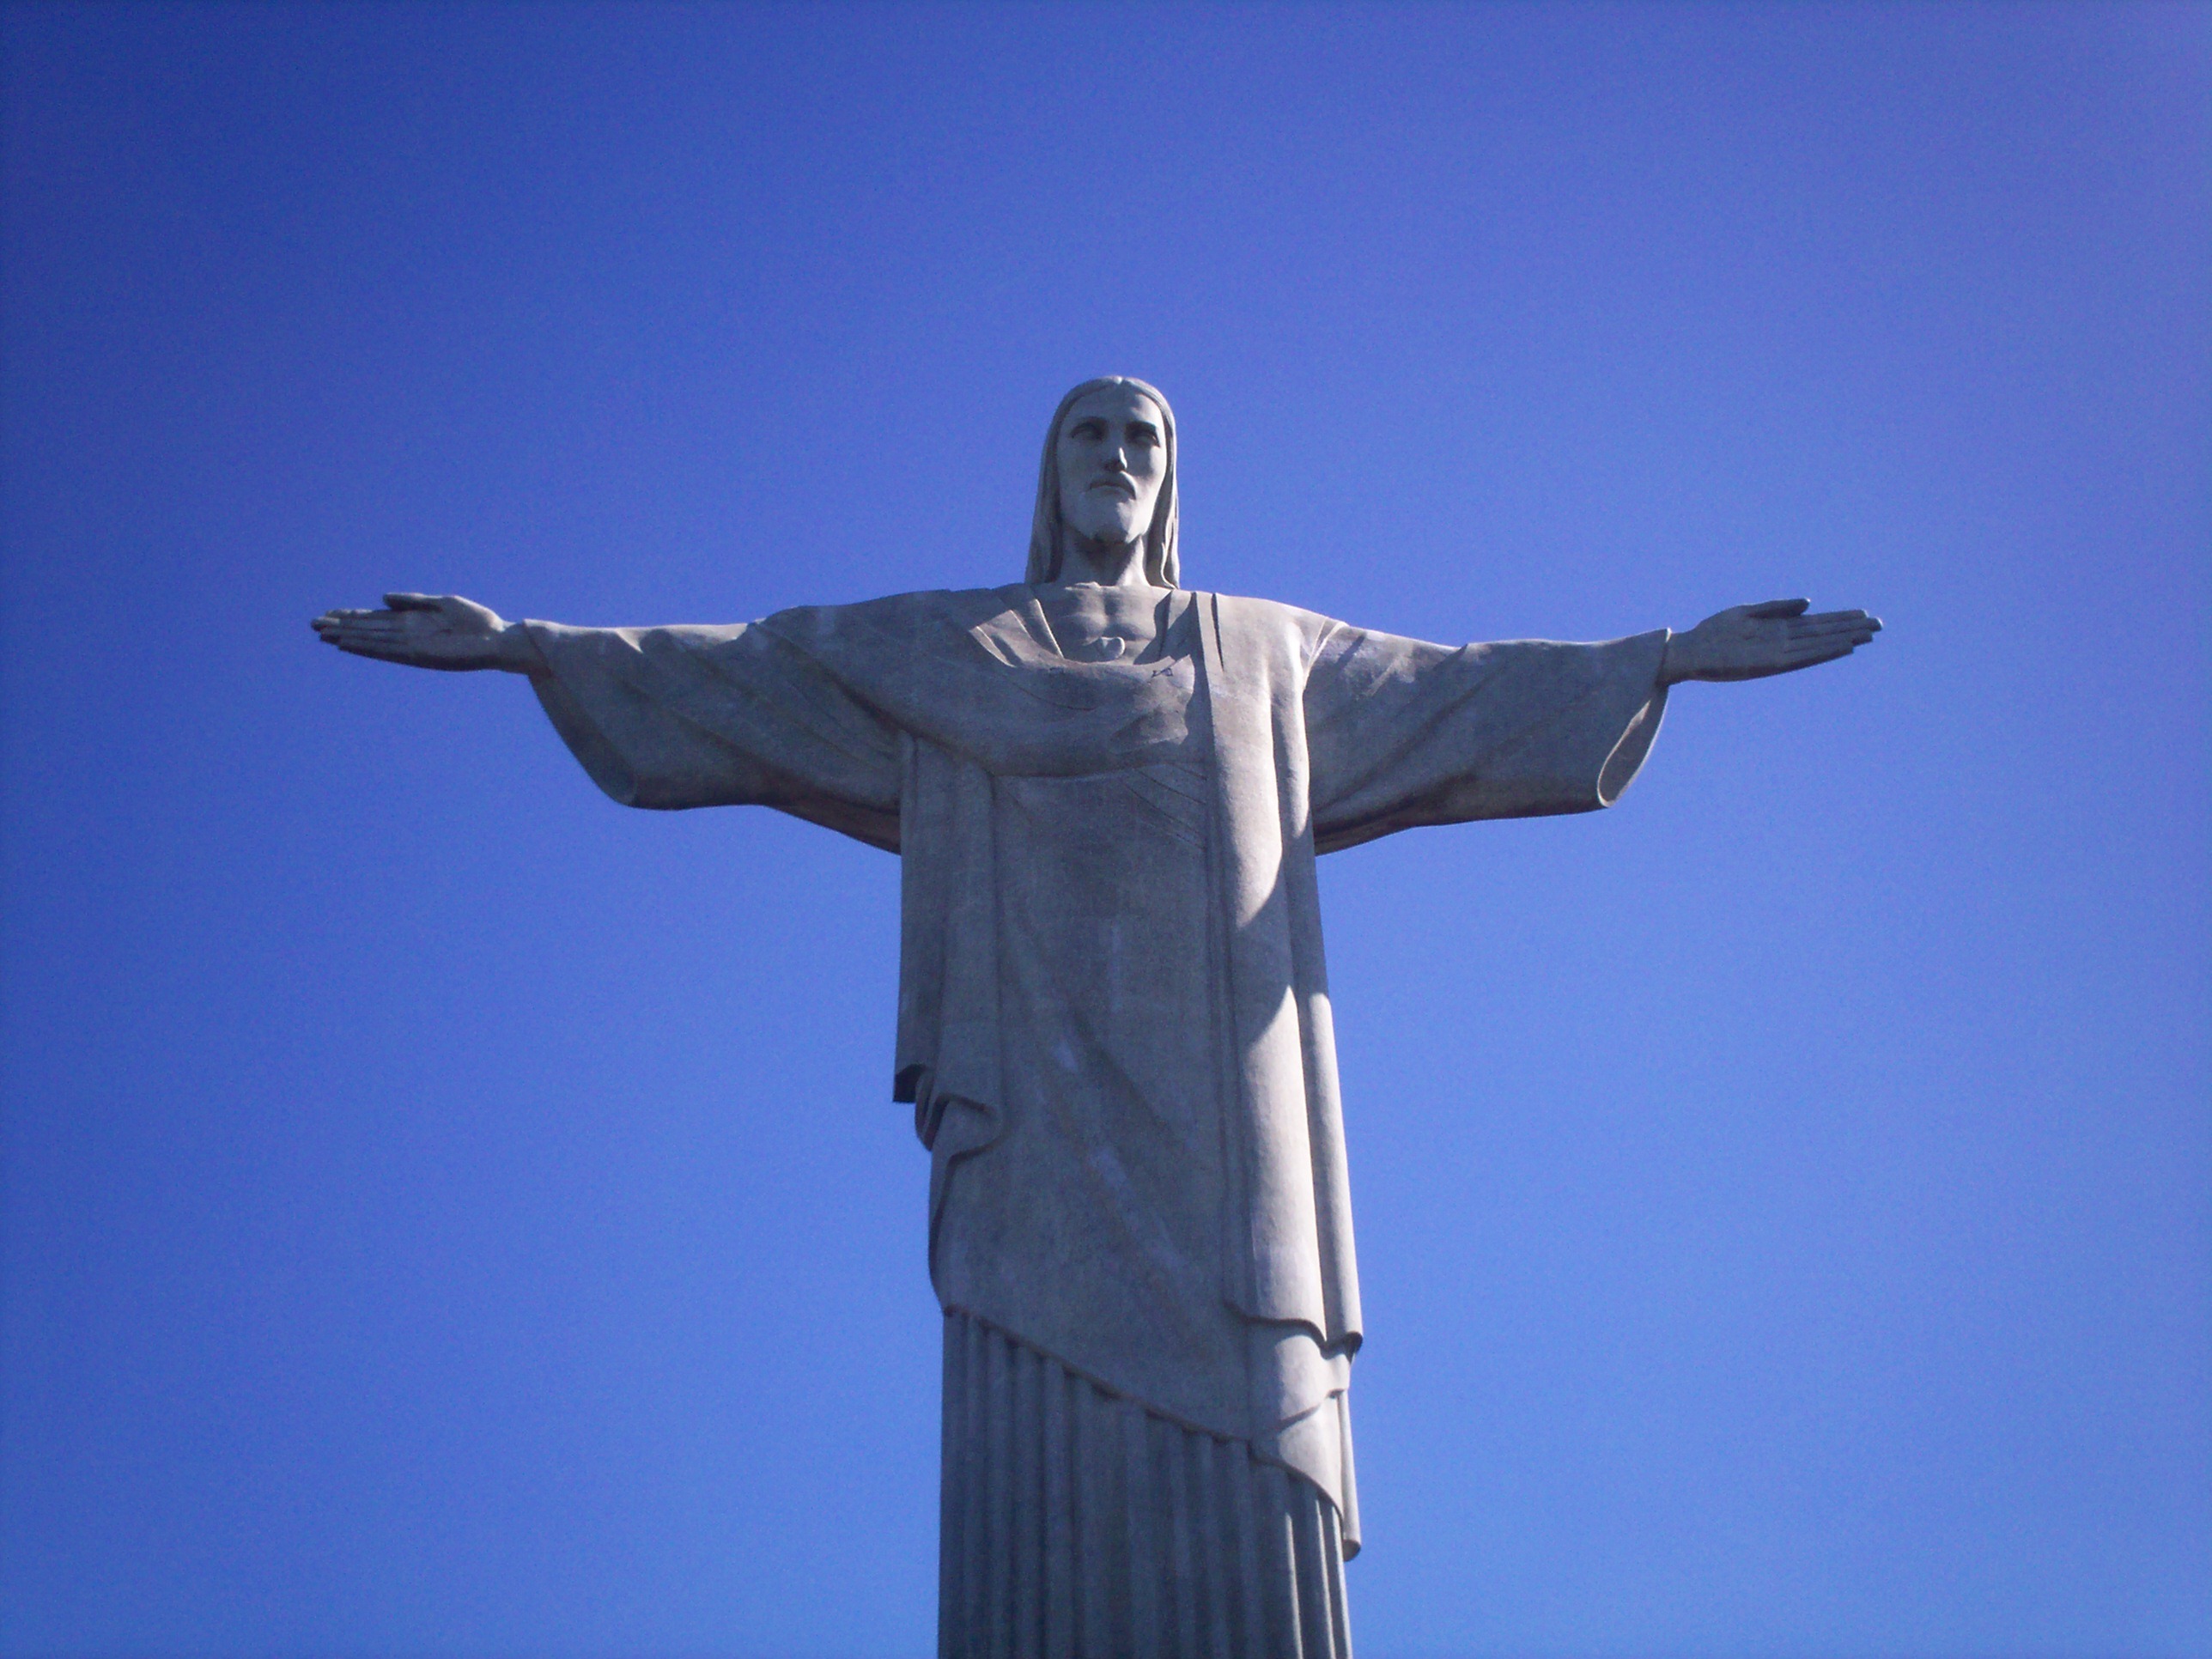 Beautiful Statue Of Jesus Christ In Light And Shadow On The Mountain In Rio De Janeiro Brazil Under The Blue Sky Free Image Download